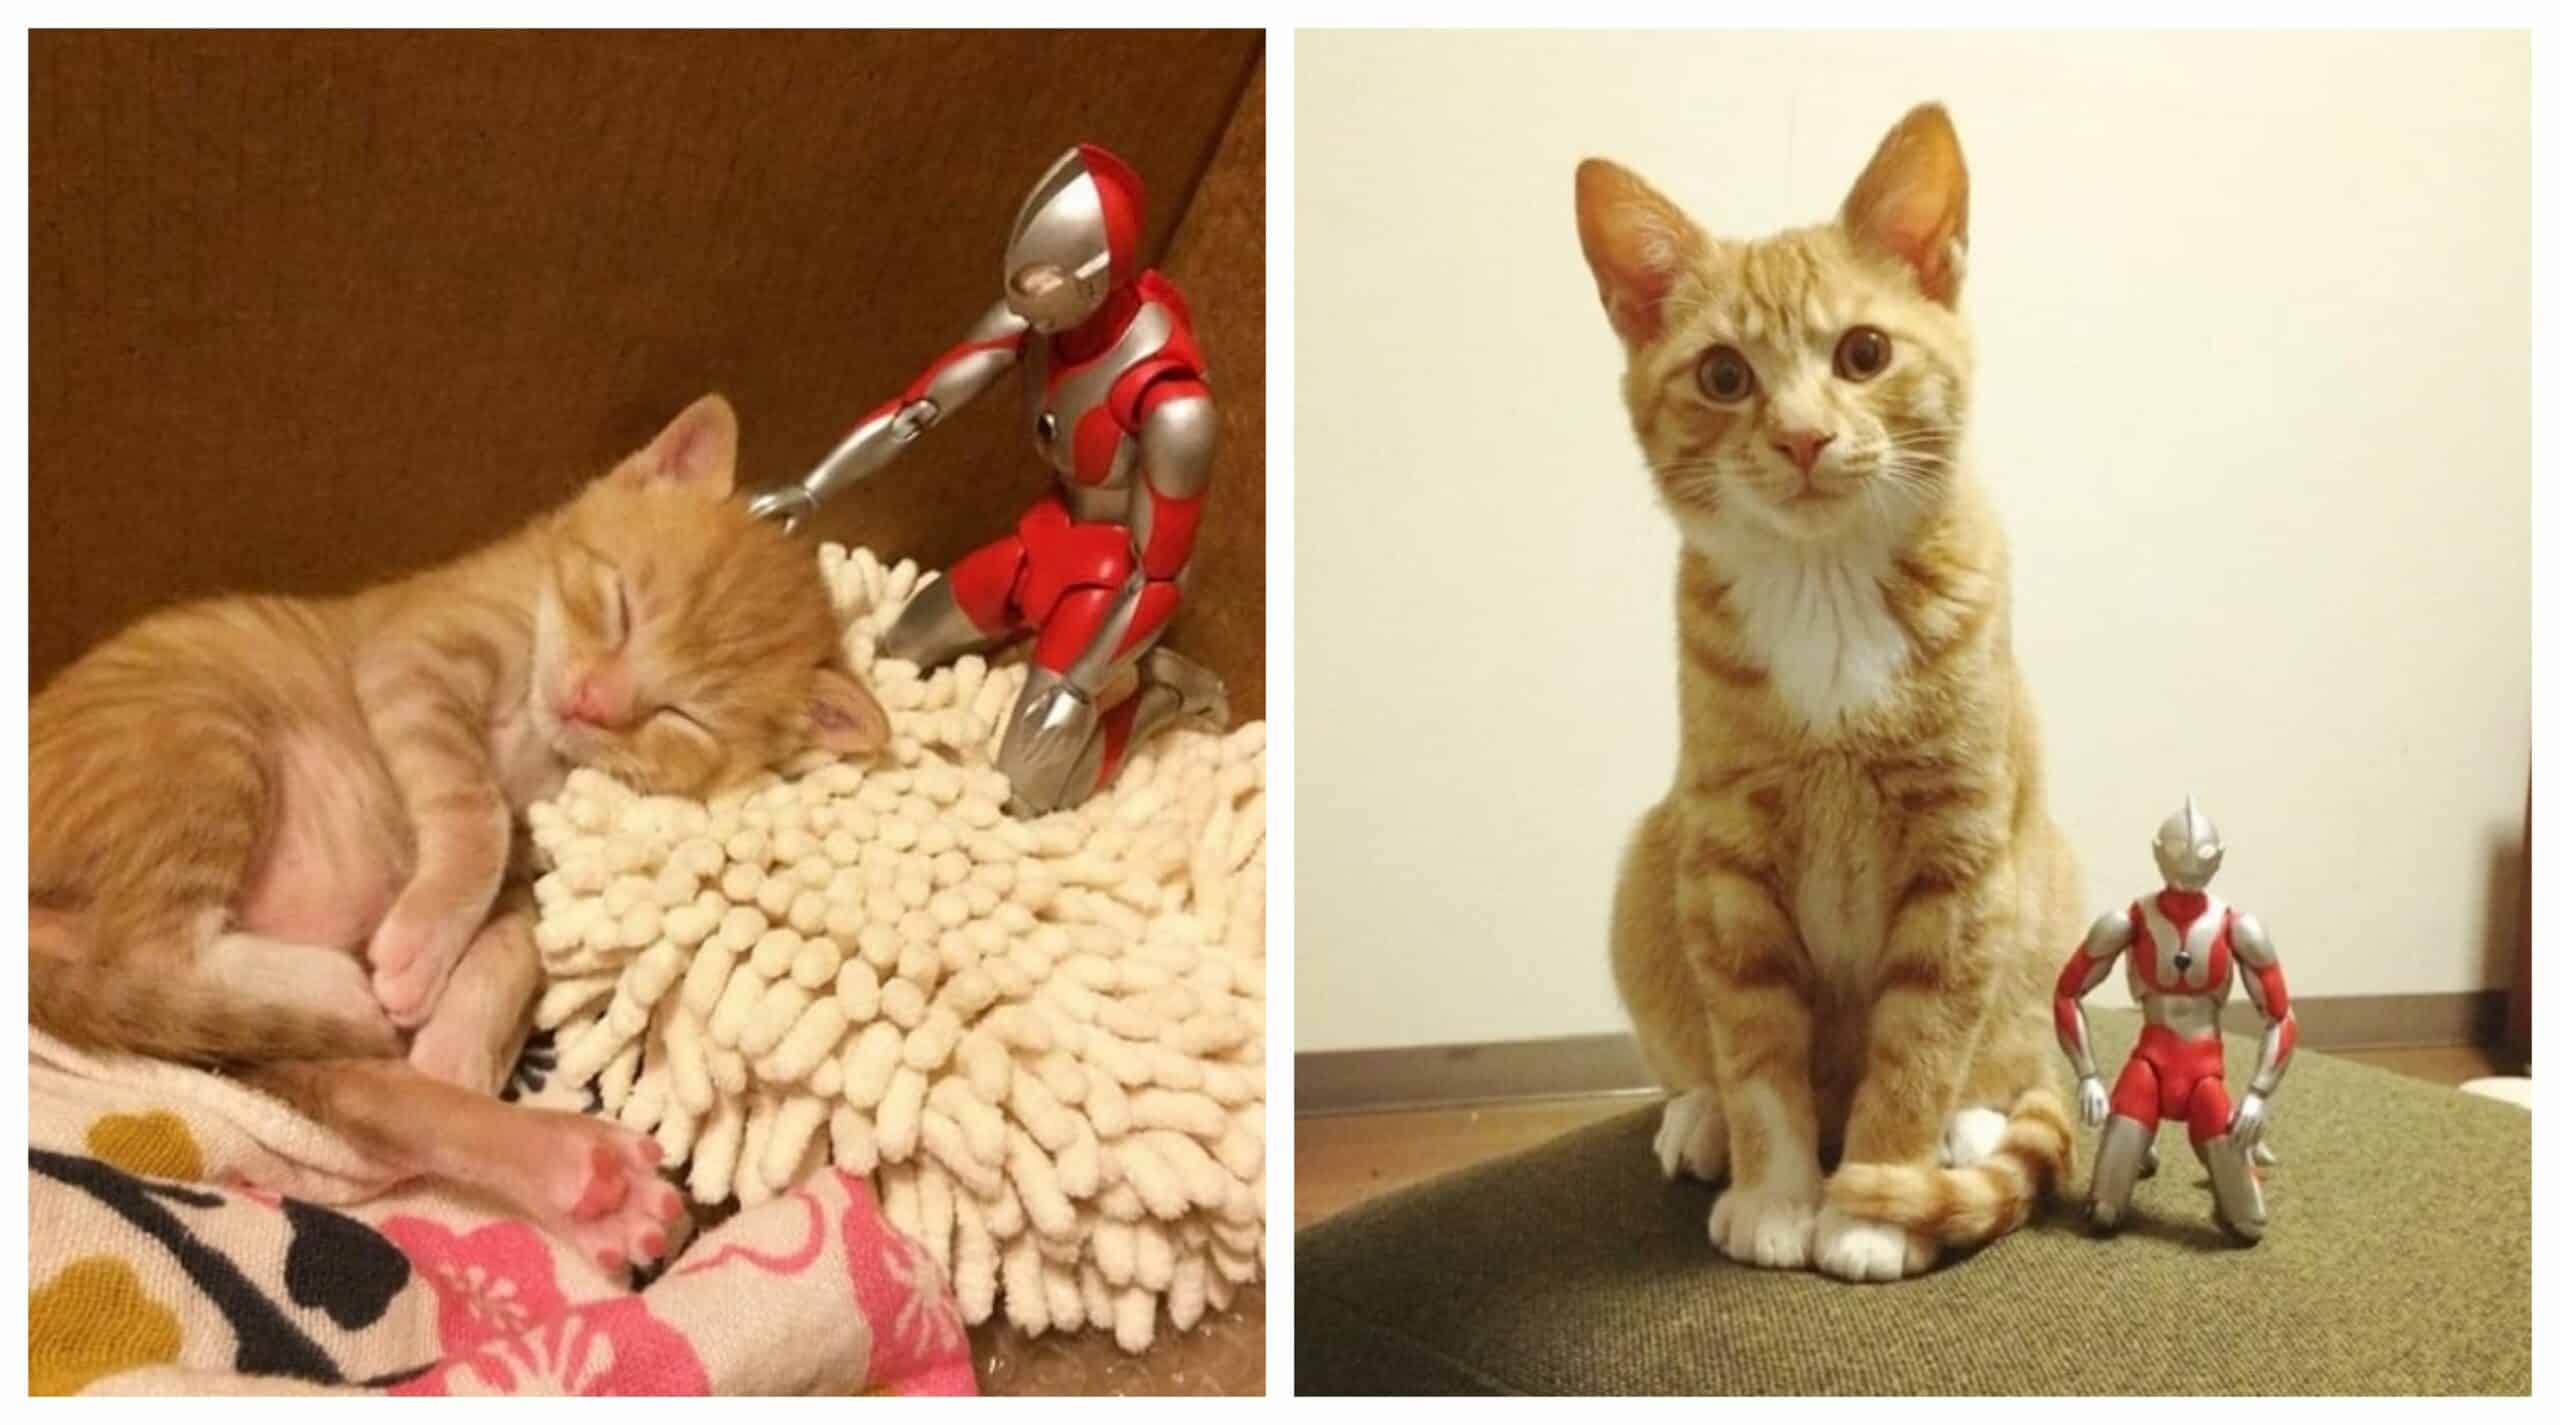 The Rescue Ginger Kitten Makes a Strange Friend to Grow Up With